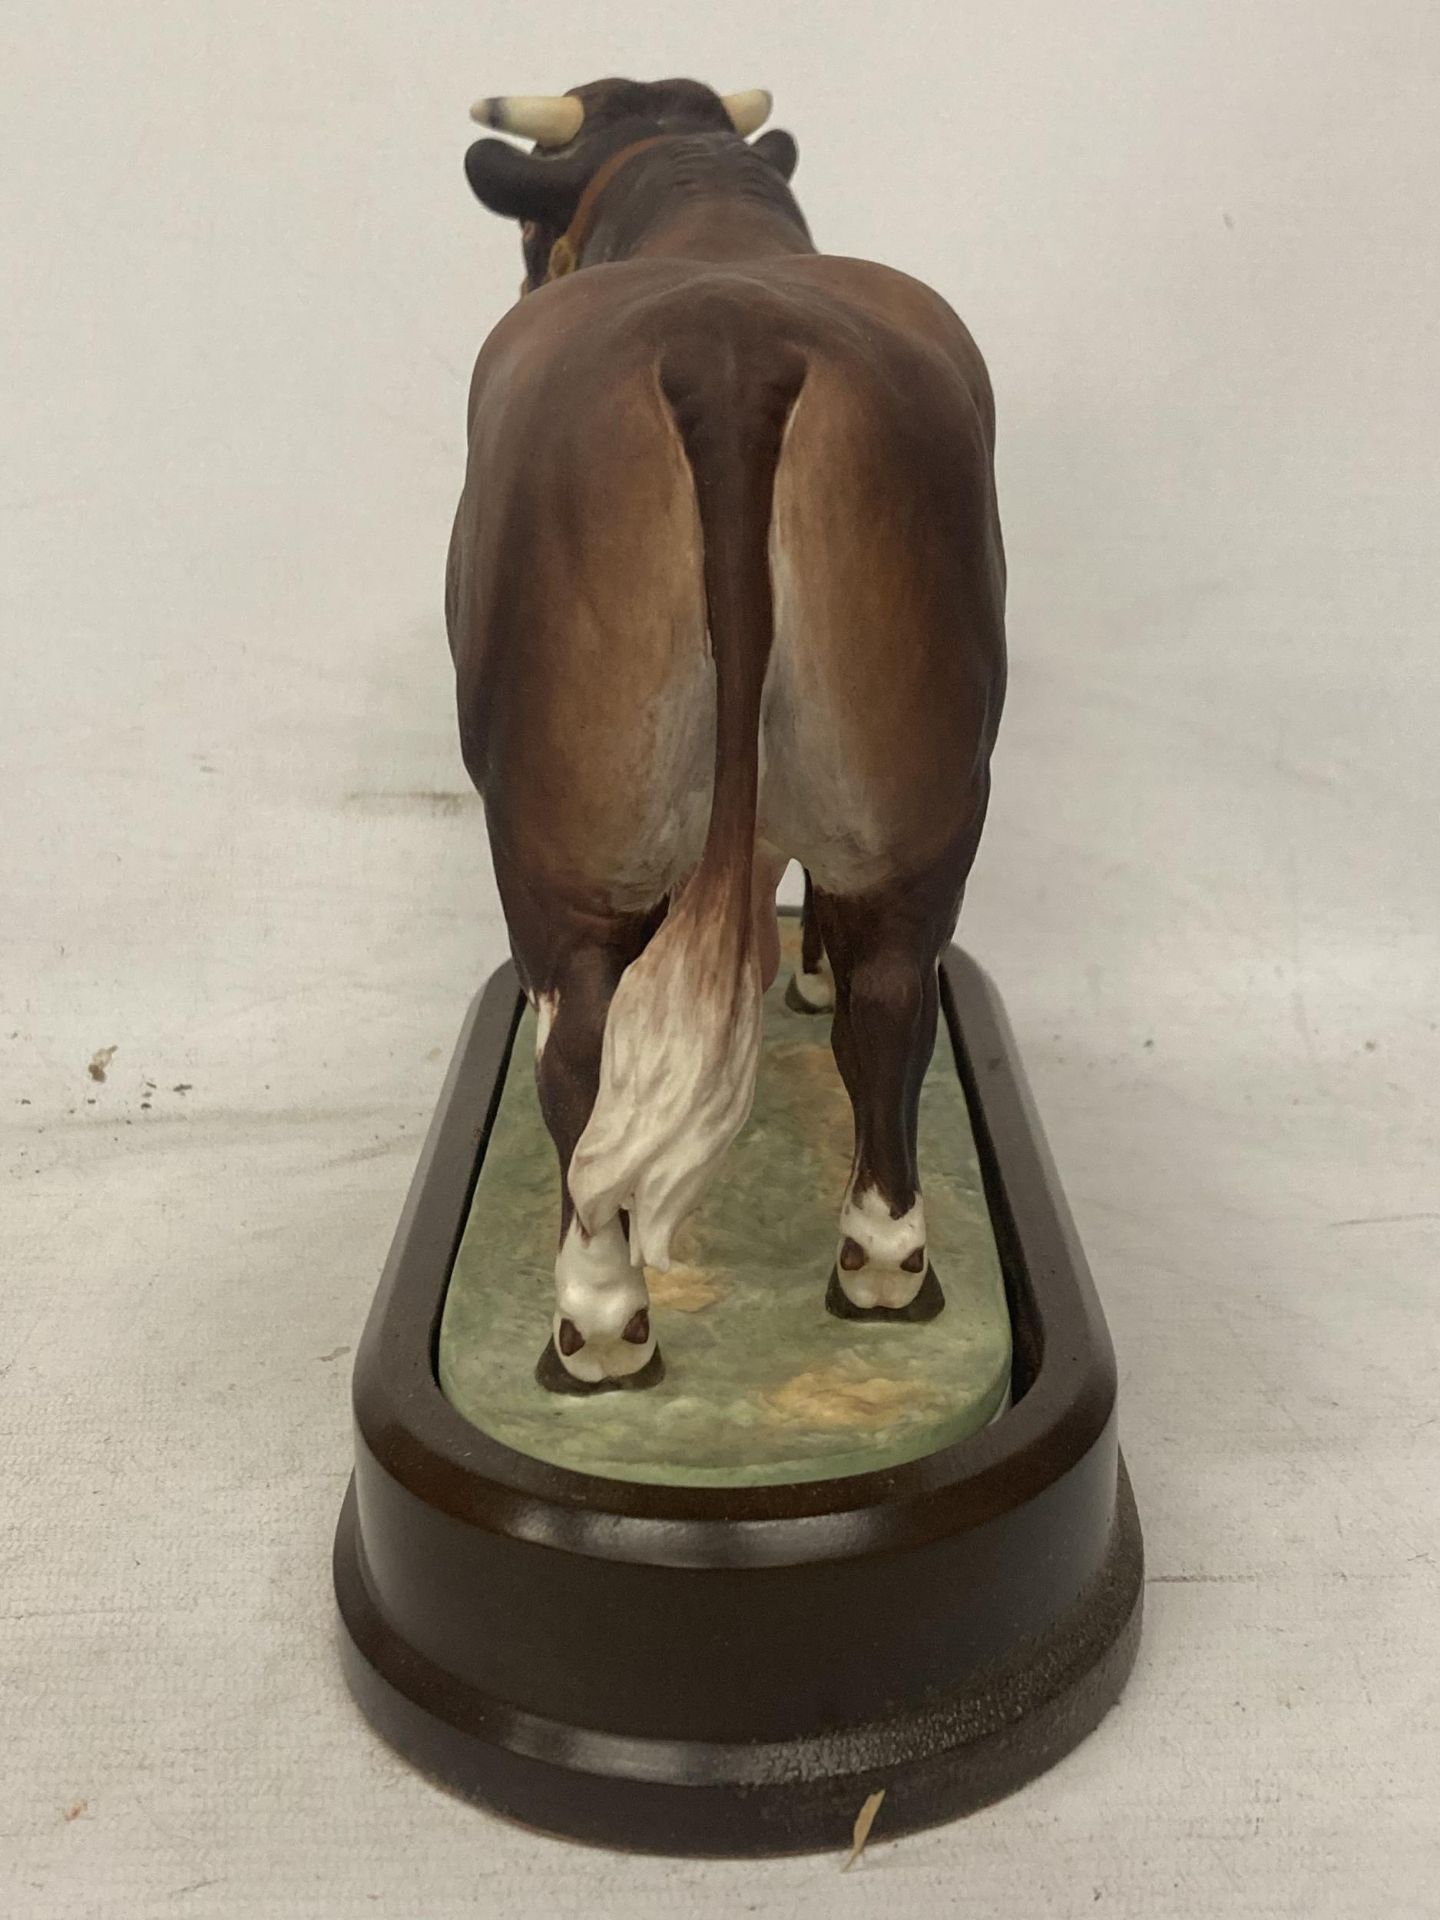 A ROYAL WORCESTER MODEL OF A DAIRY SHORTHORN BULL MODELLED BY DORIS LINDNER PRODUCED IN A LIMITED - Image 4 of 5